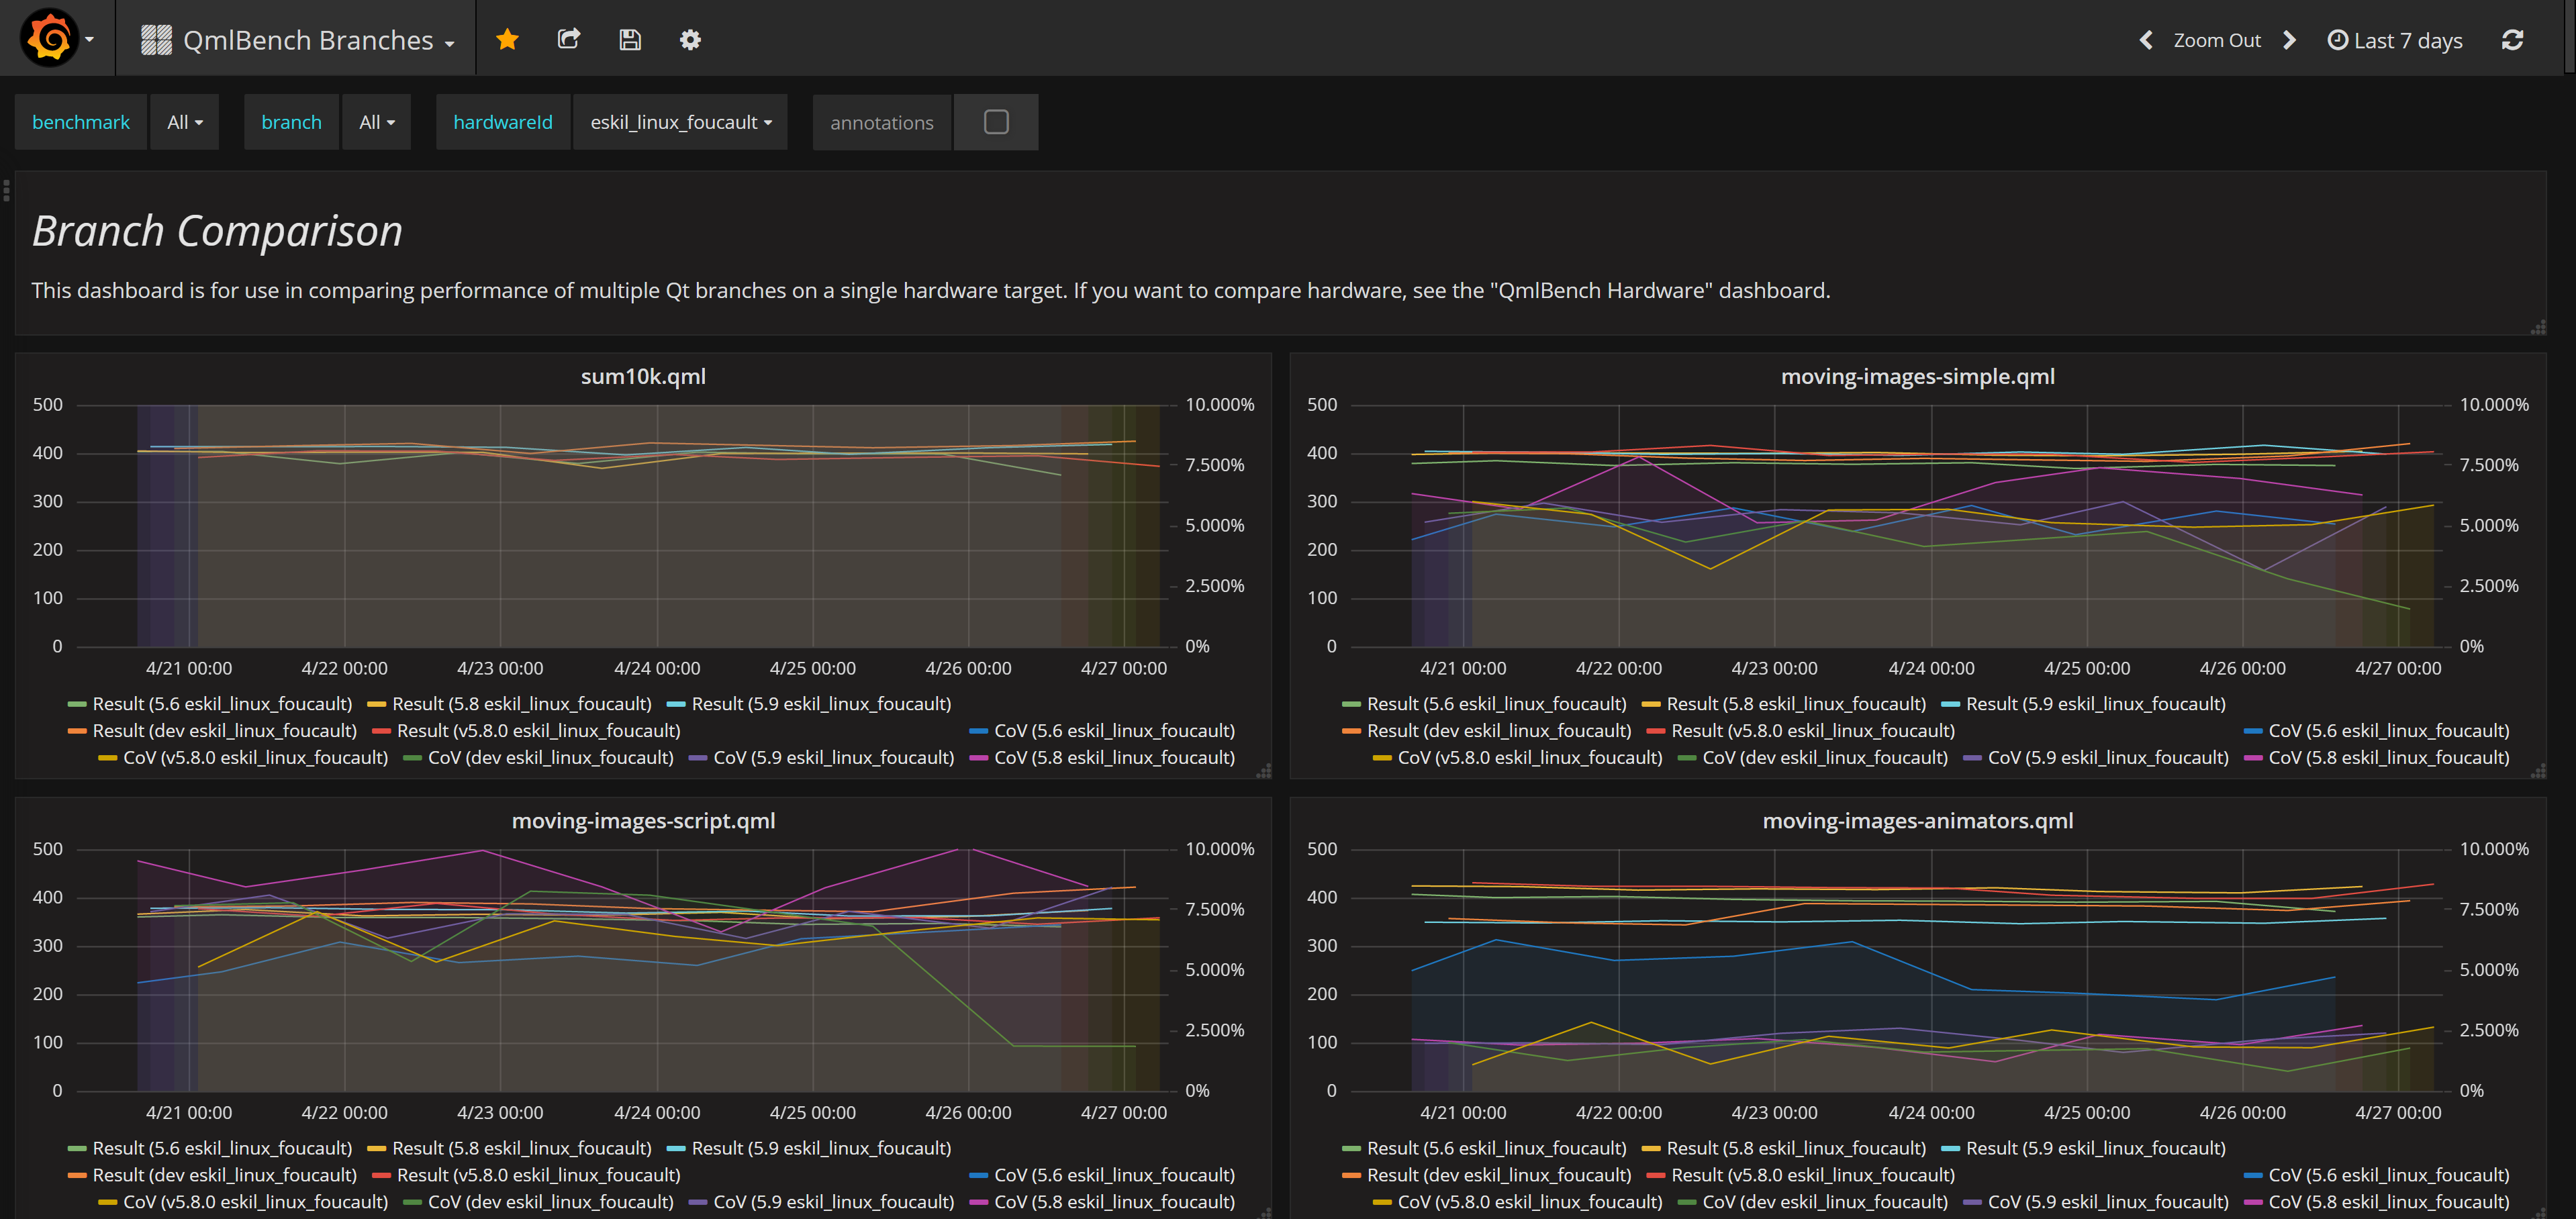 Grafana showing results of running benchmarks